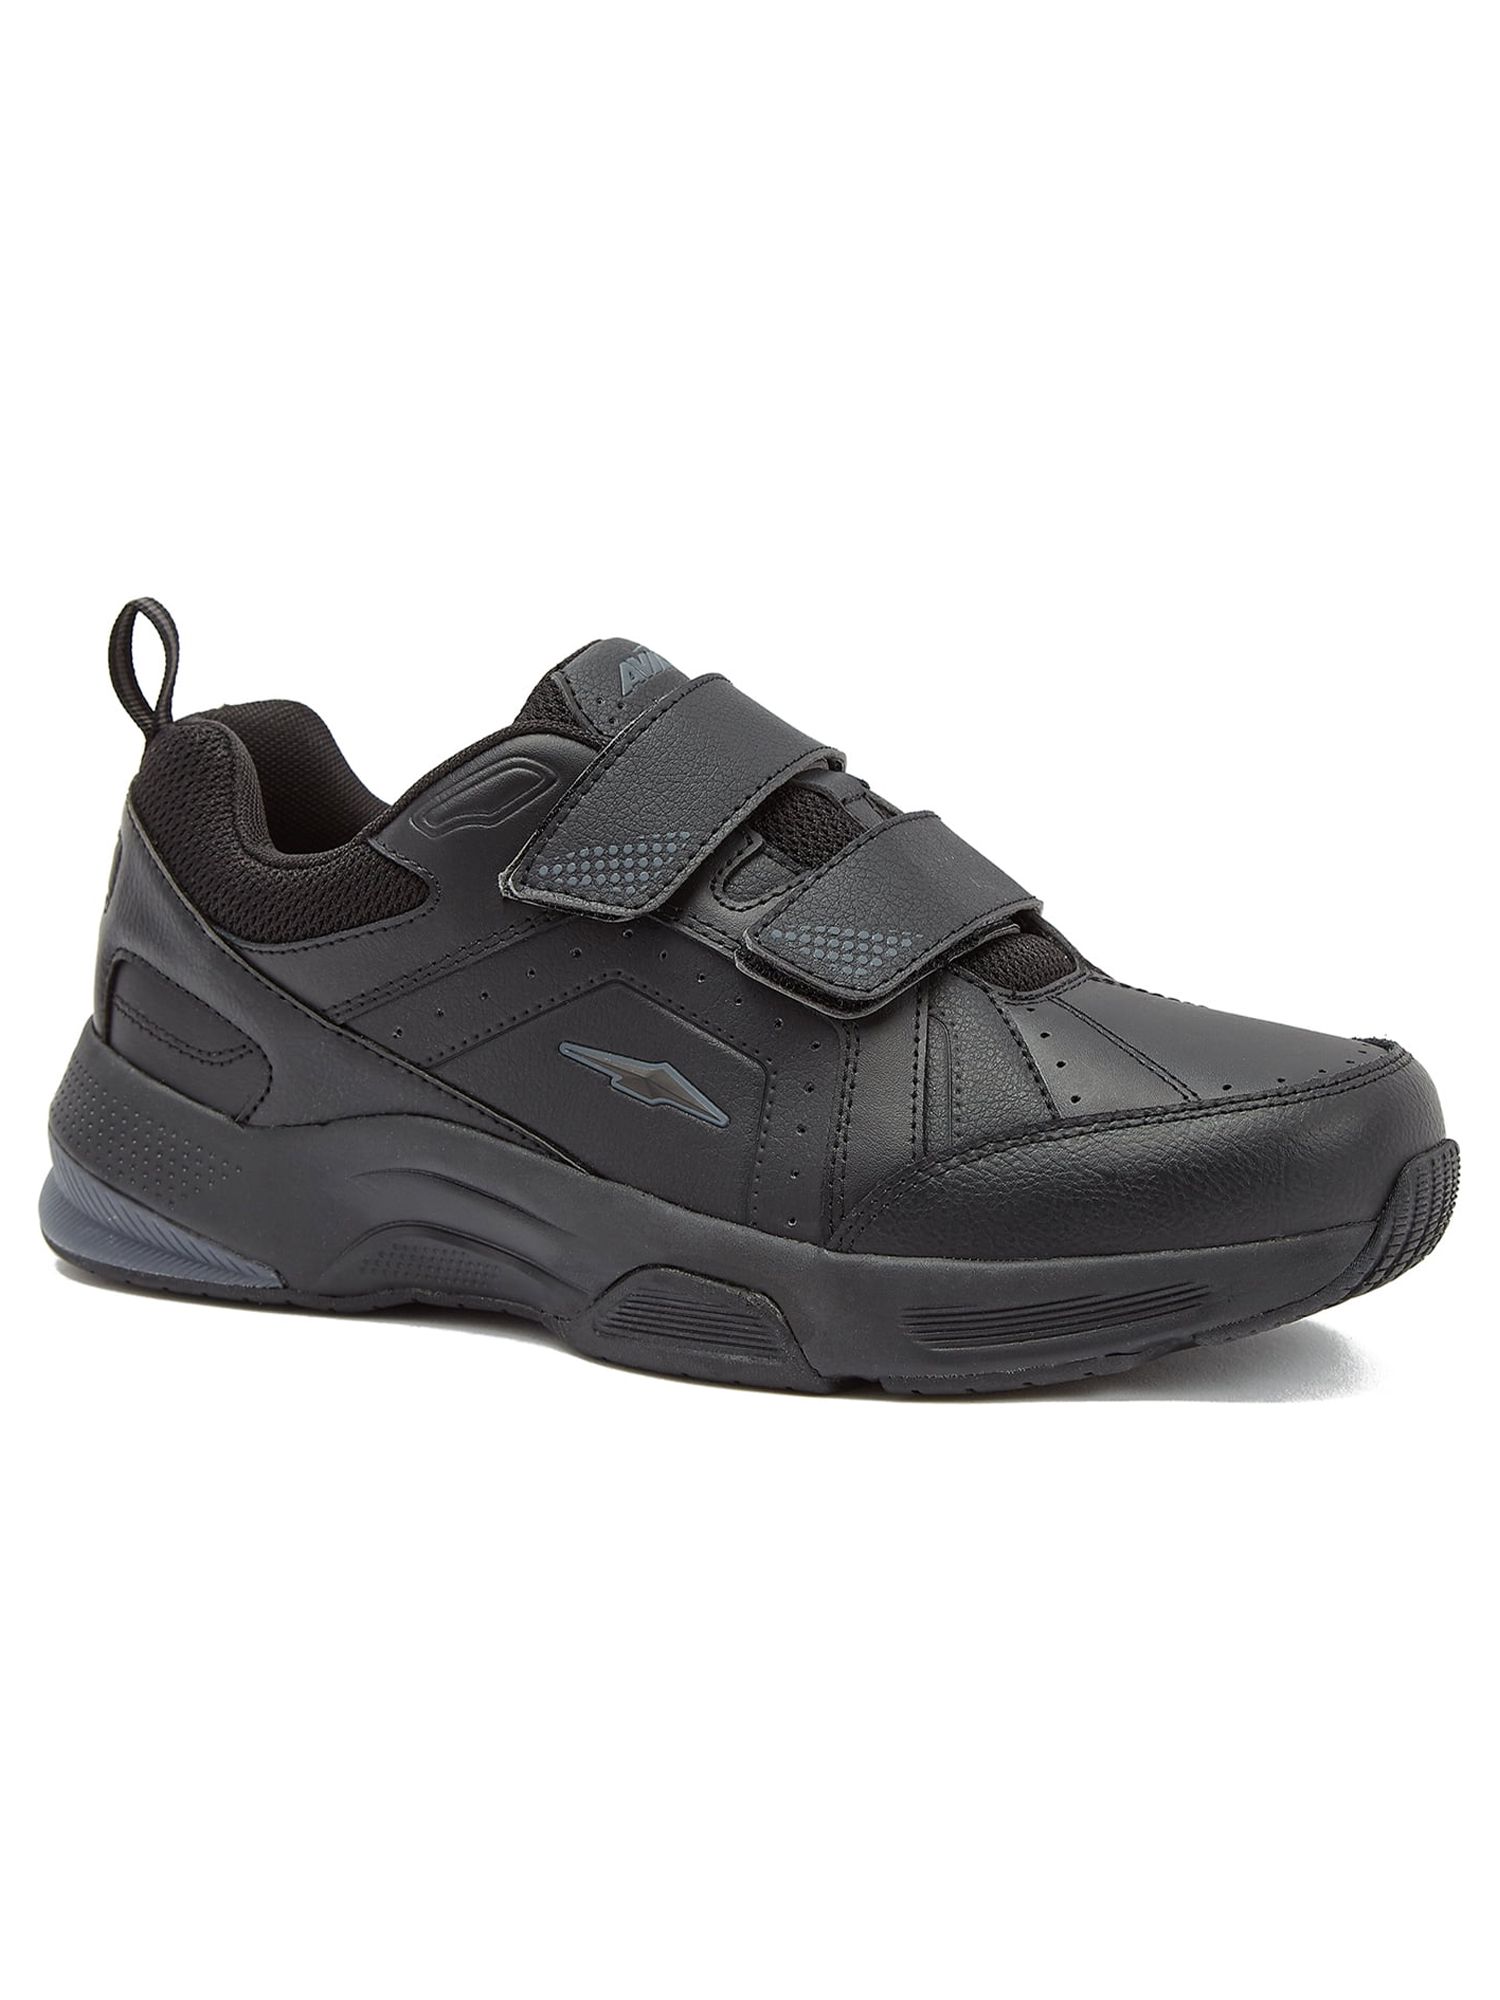 Avia Men's Quickstep Strap Wide Width Walking Shoes - image 1 of 5